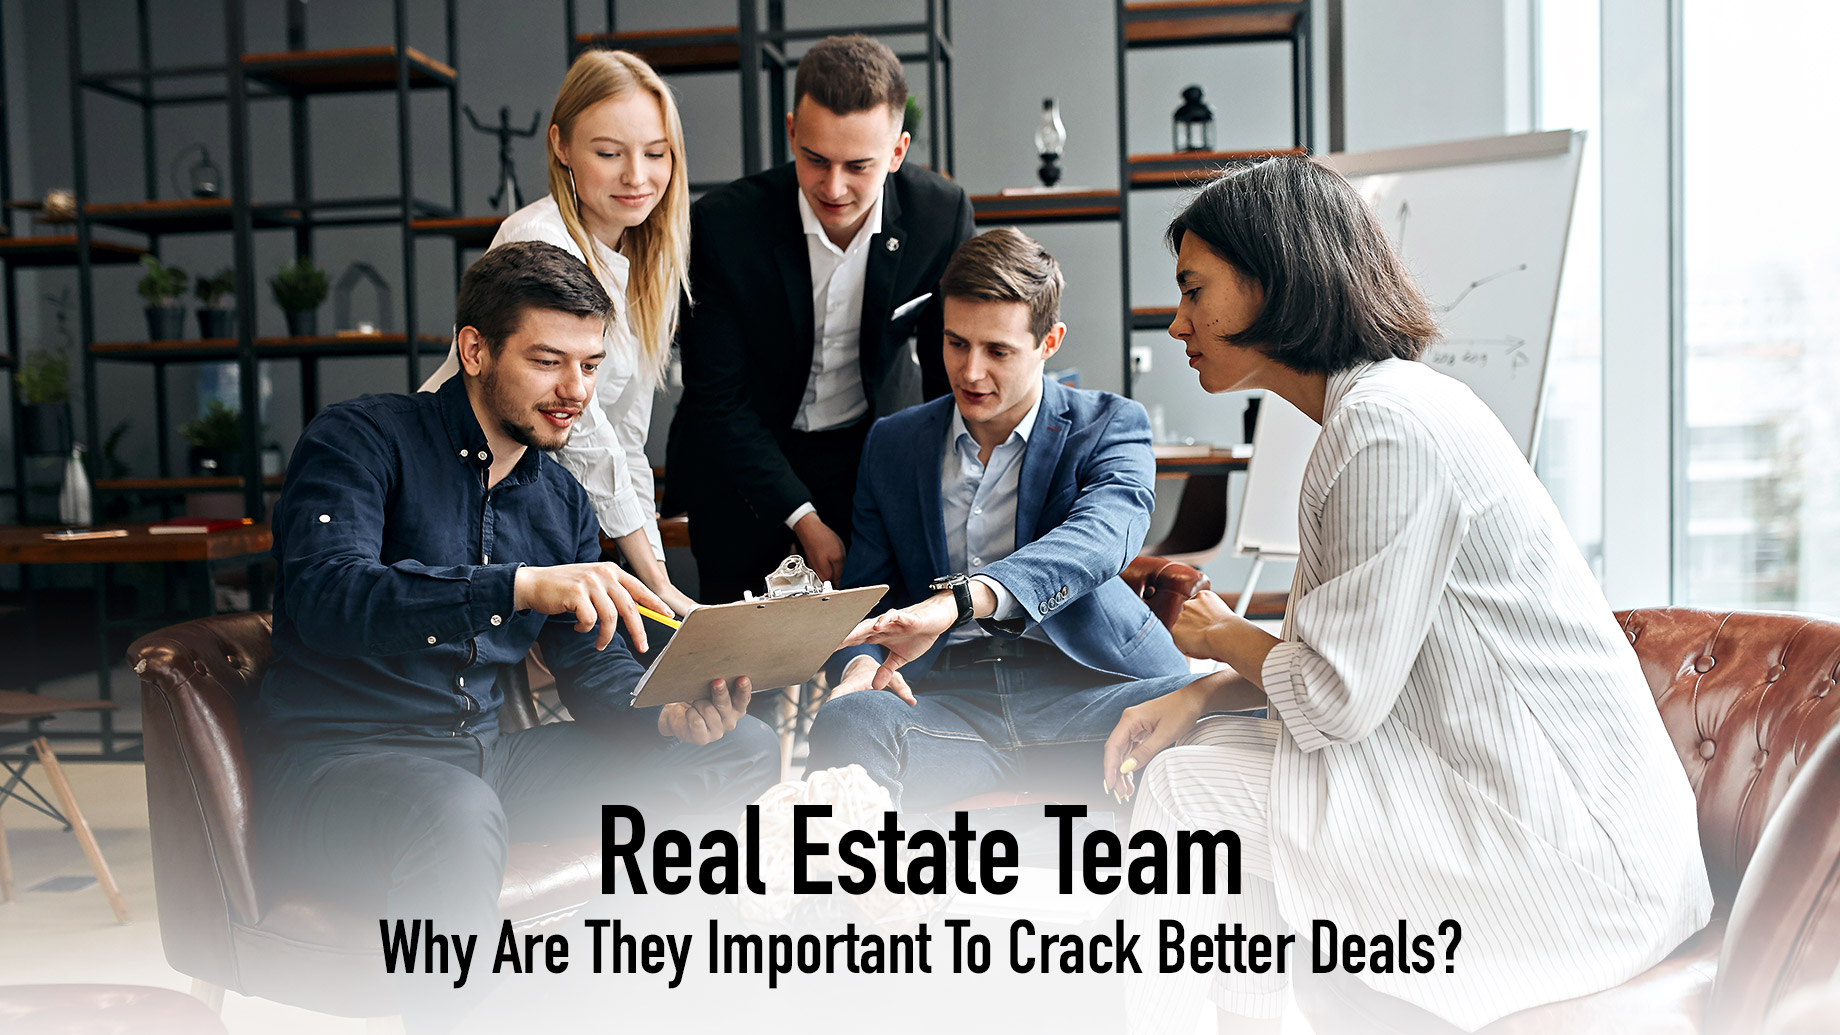 Real Estate Team - Why Are They Important To Crack Better Deals?